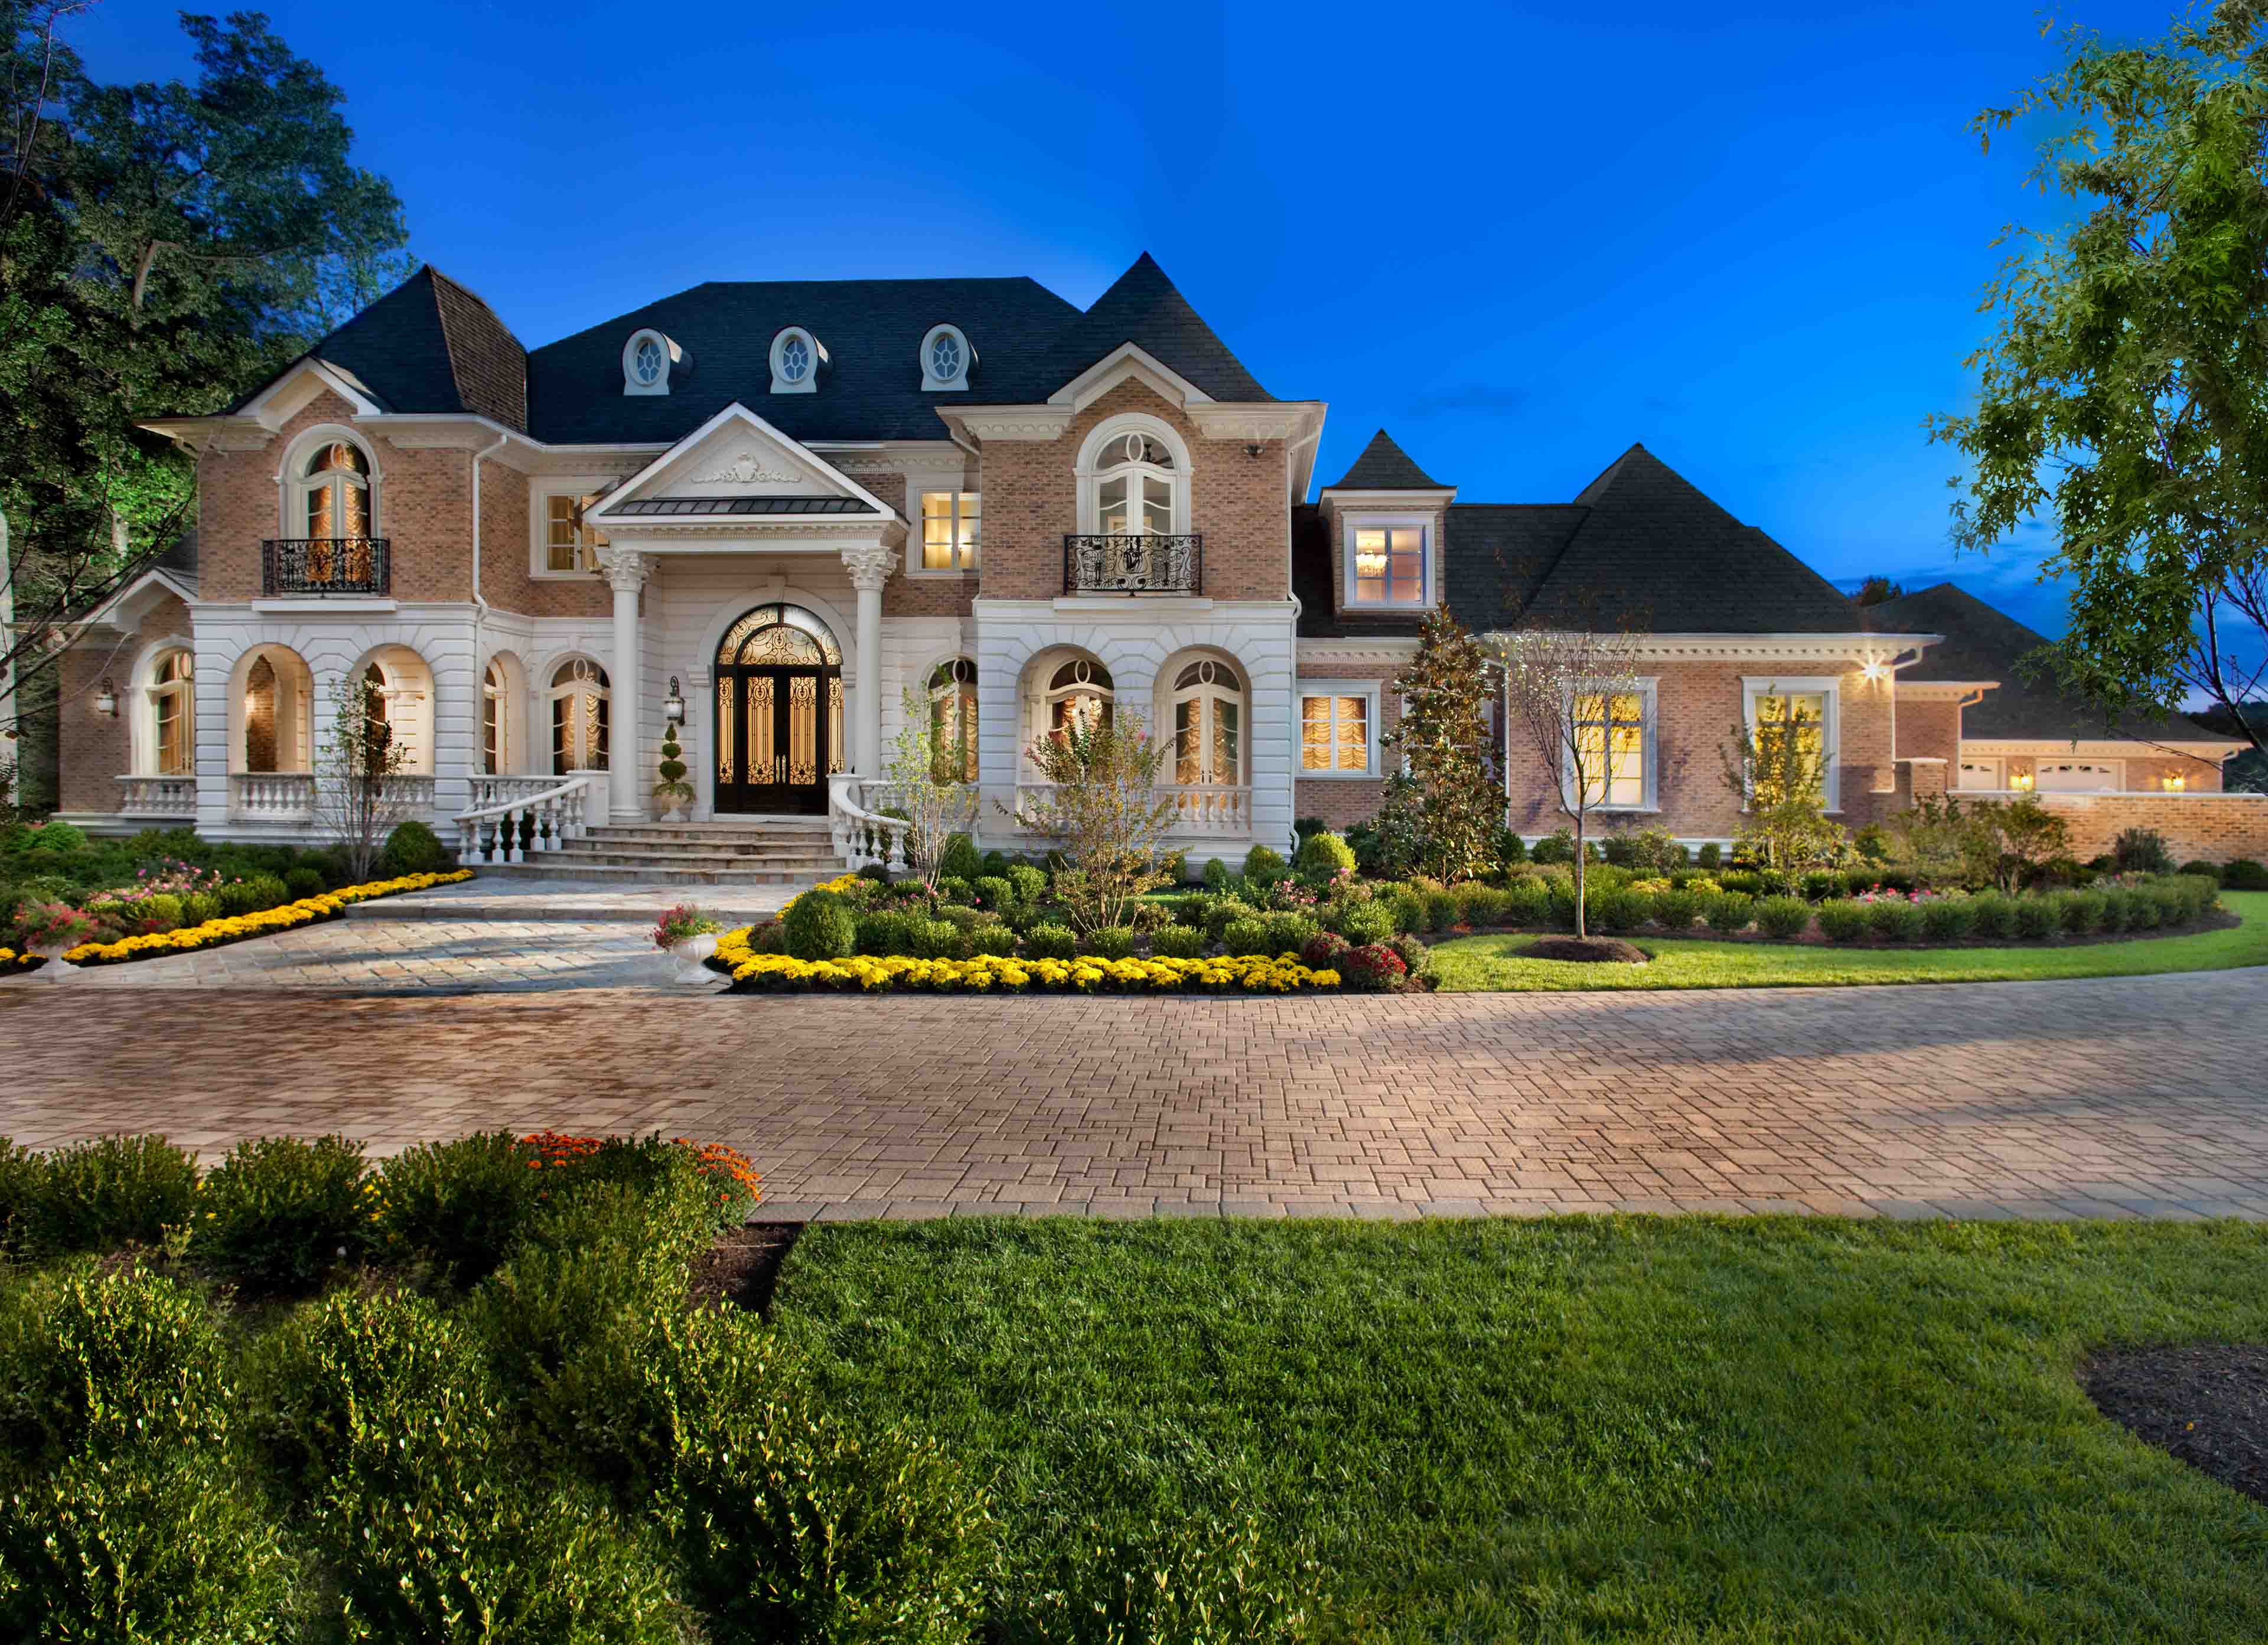 Exterior of Dream House, Mansion with circular driveway